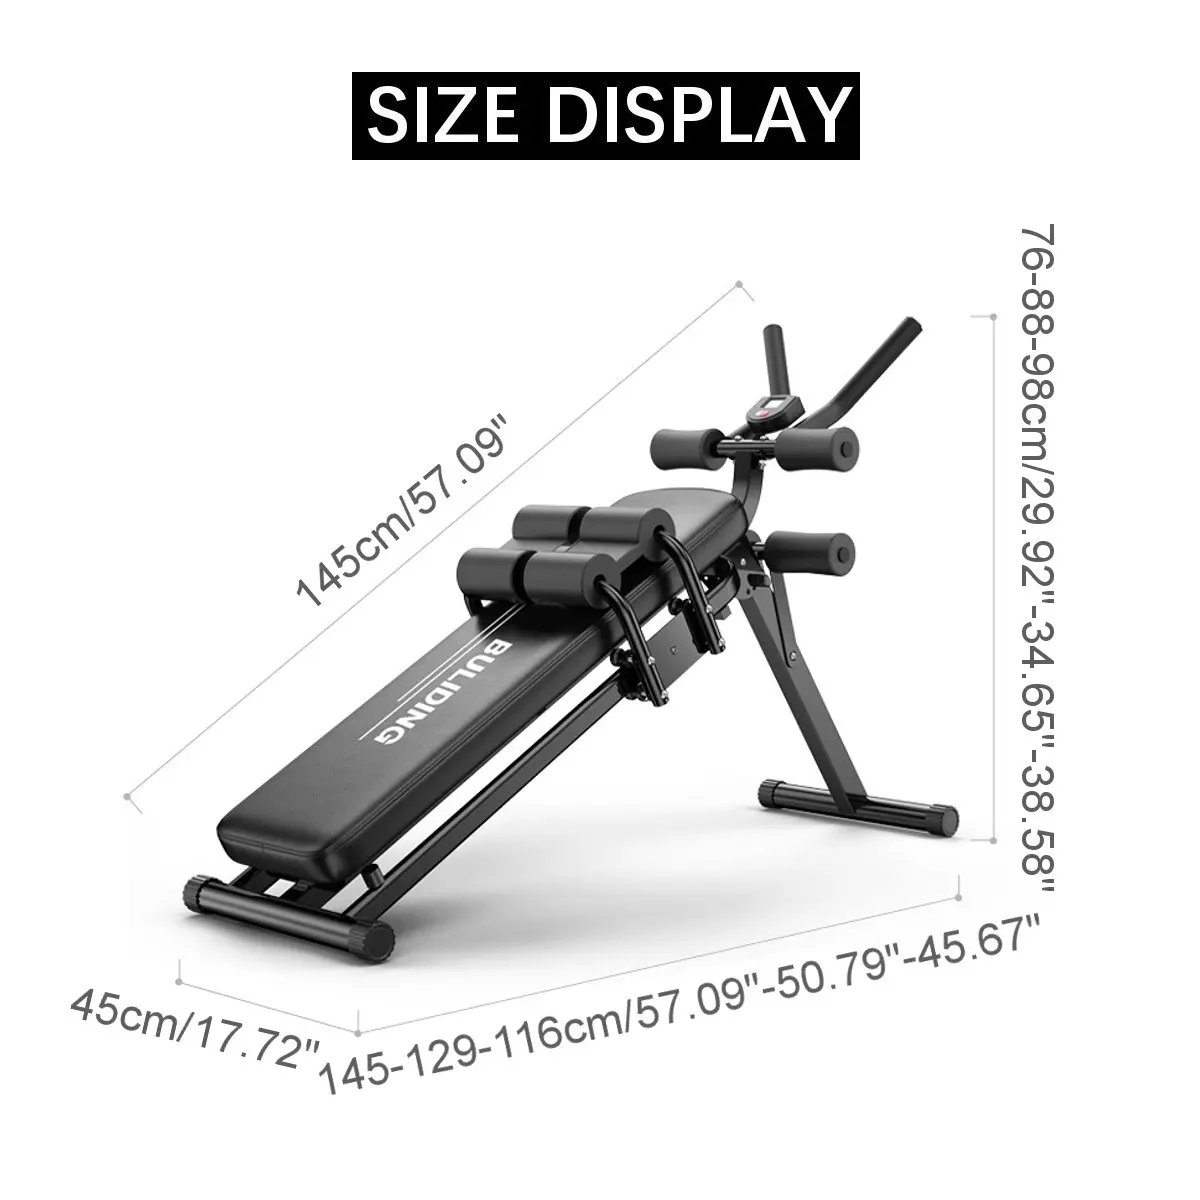 GRT Fitness Hab447450cb9b4946a621ccc8569c9e09n 3 Levels Adjustable Sit Up Benches Abdominal Muscle Trainer Multifunction Abs Workout Lose Weight Home Gym Fitness Equipment  